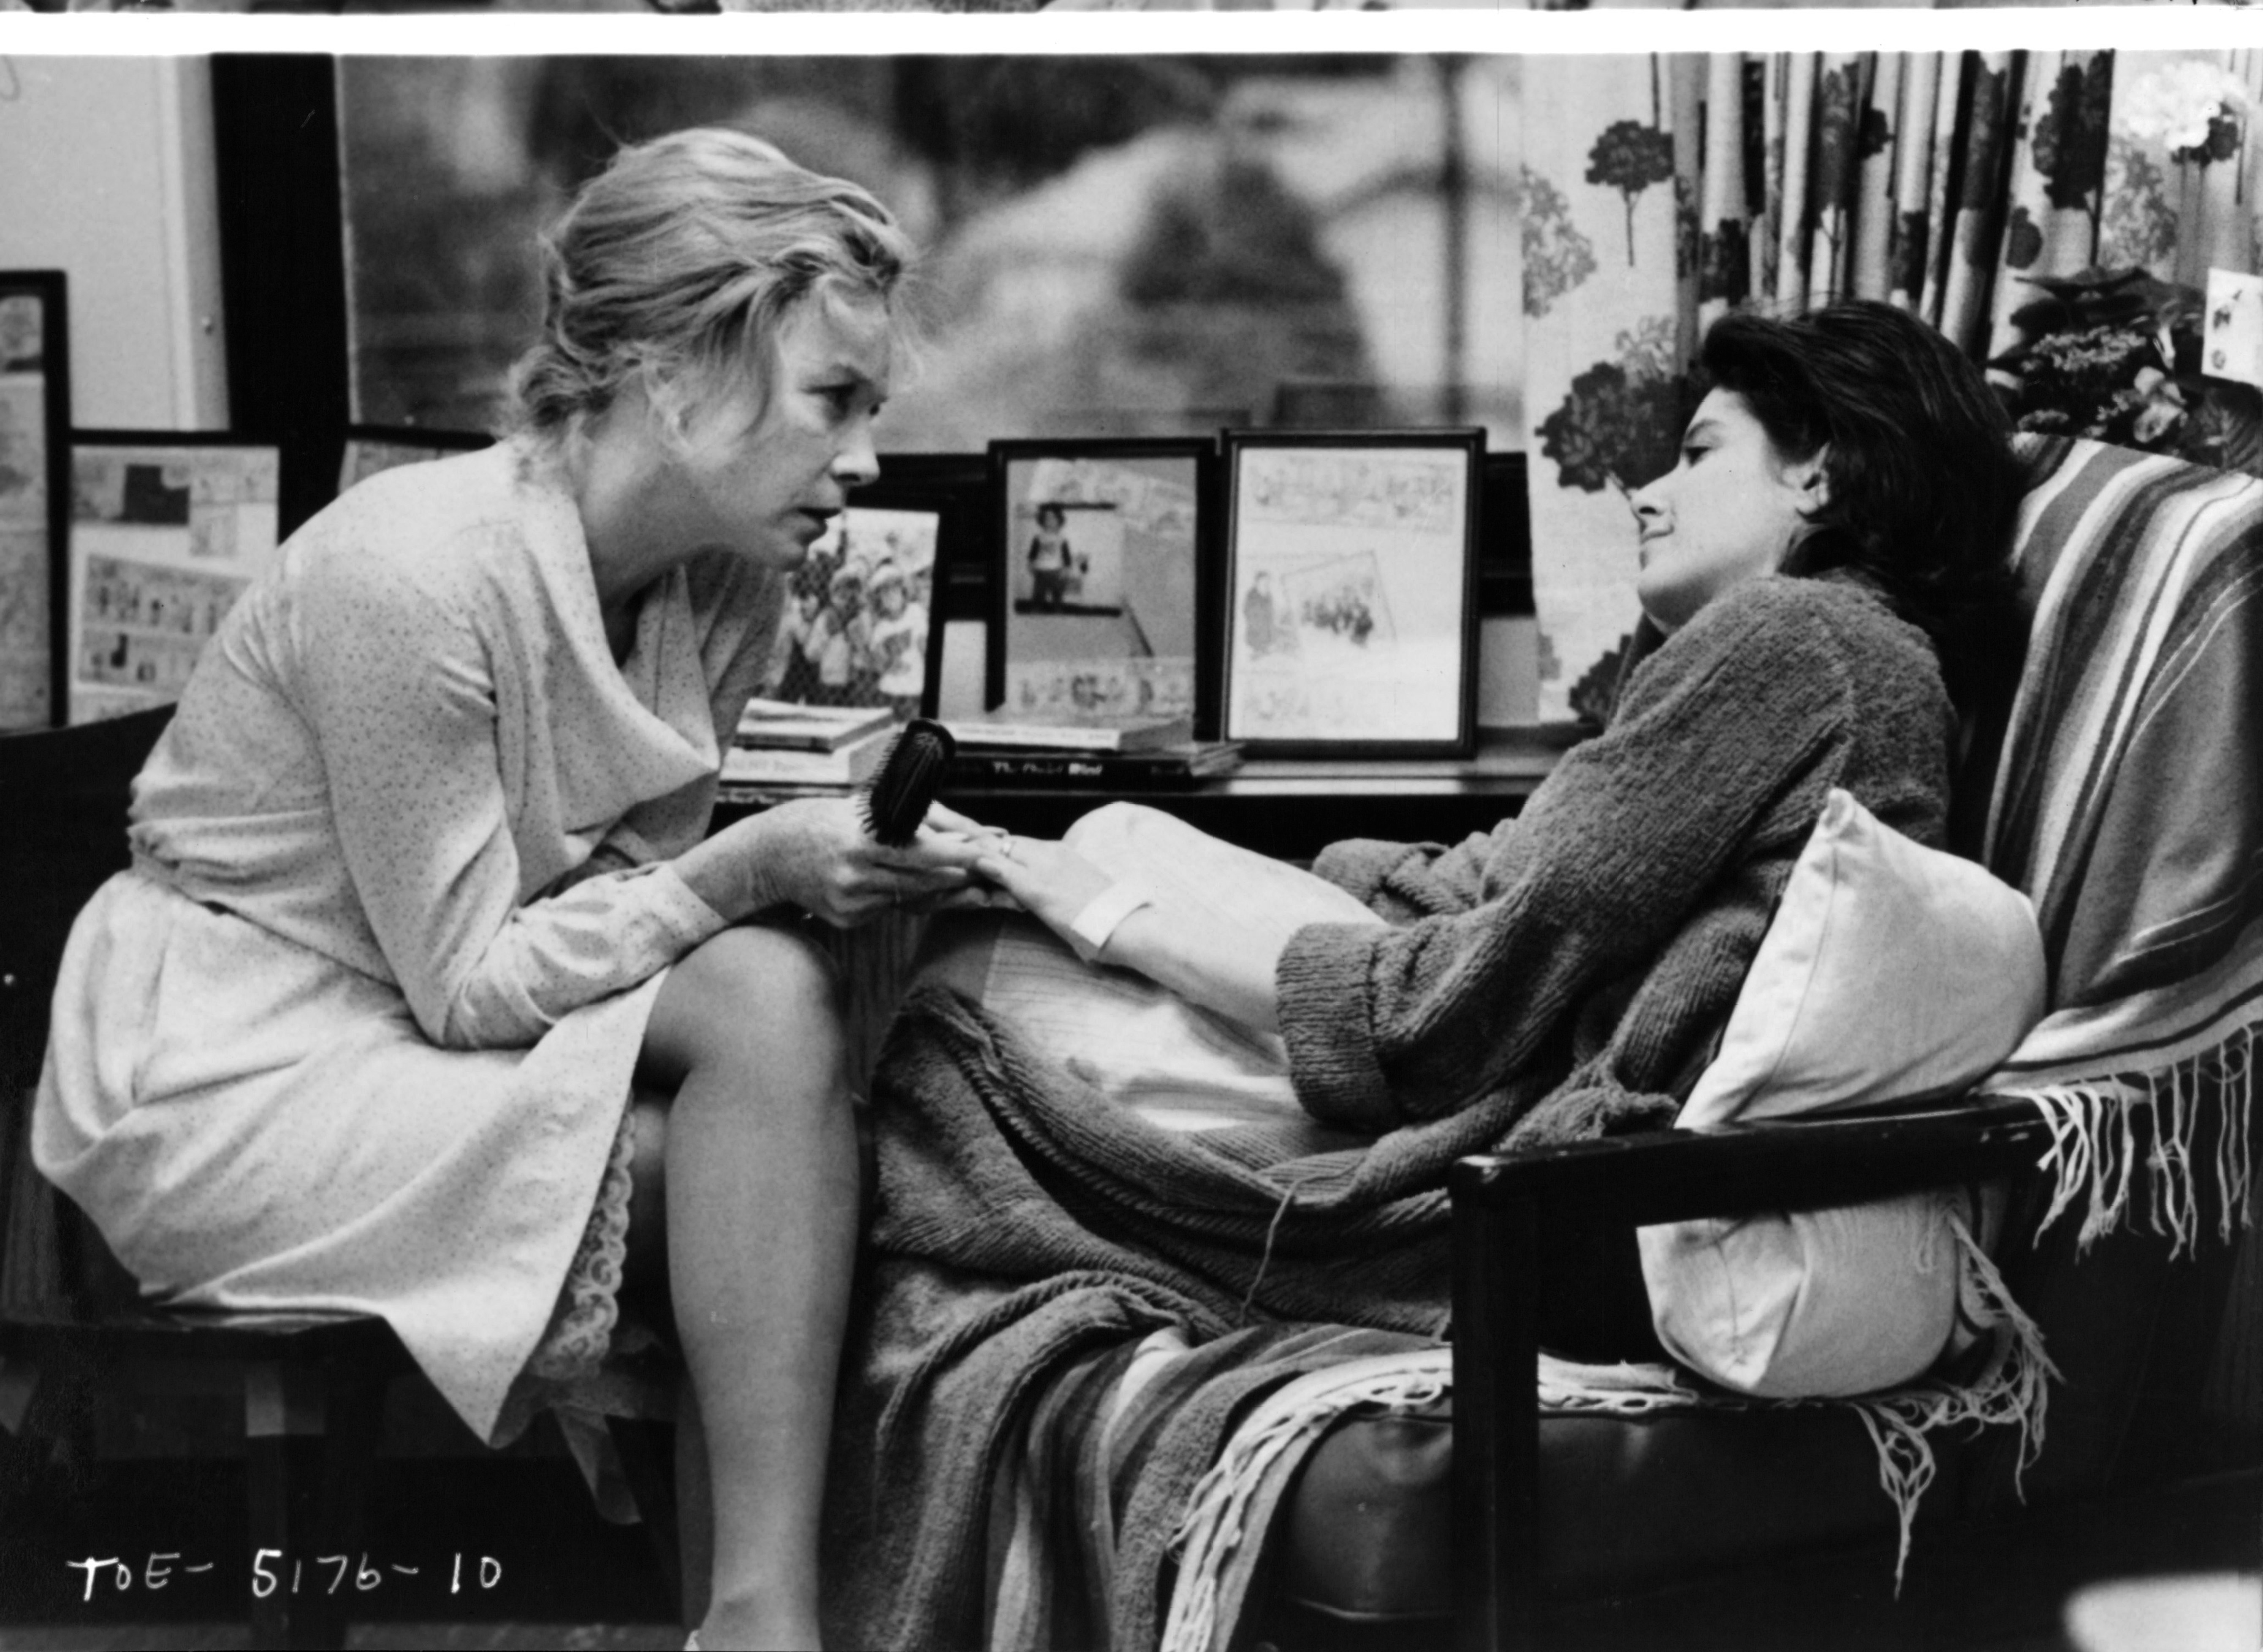 Still of Shirley MacLaine and Debra Winger in Terms of Endearment (1983)